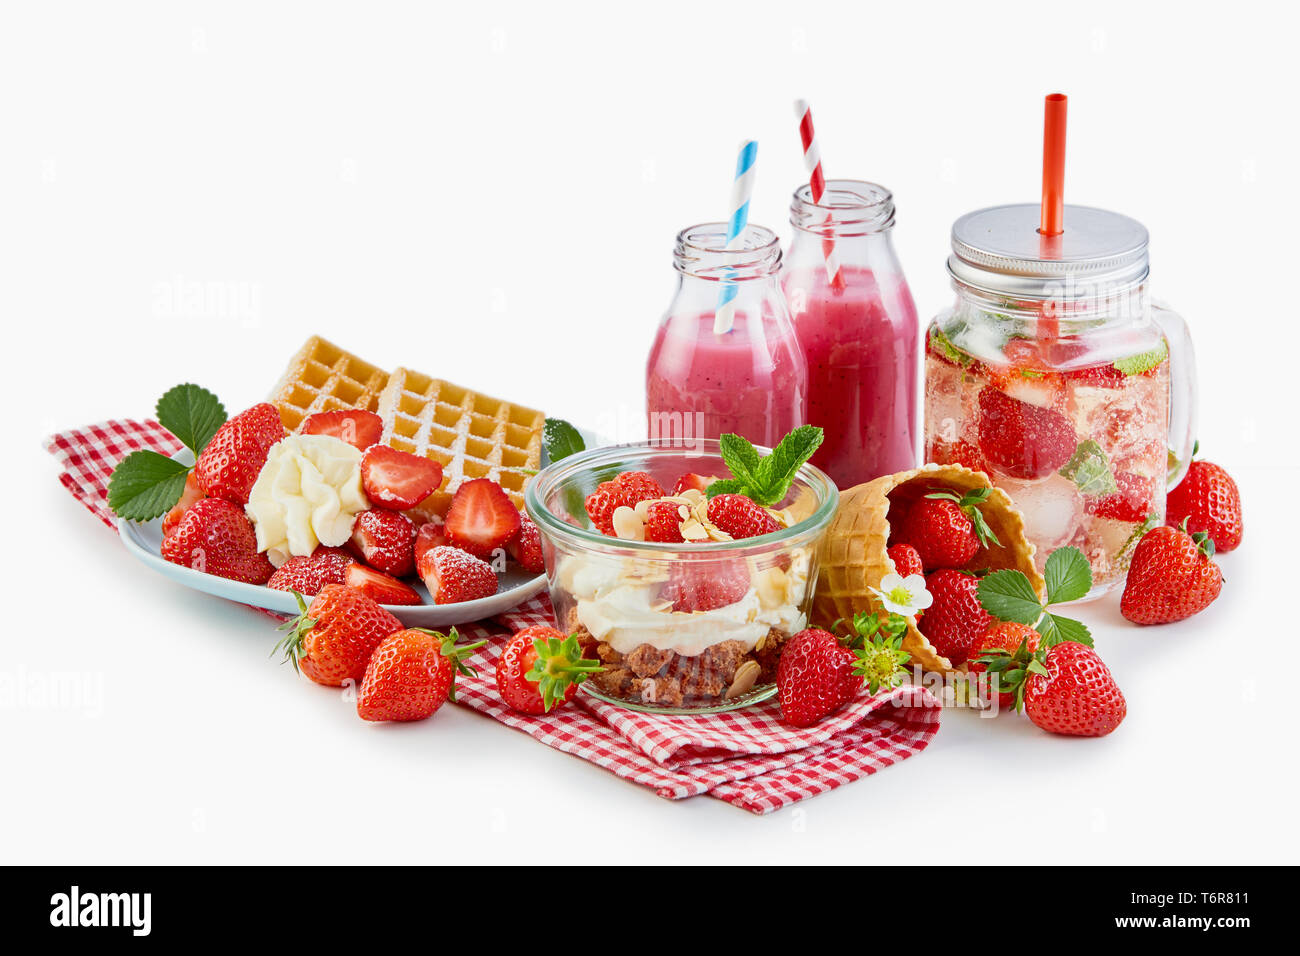 Recipes using fresh ripe strawberries over white with a waffle and cream, muesli topped with yogurt and berries, smoothies, infused water and whole fr Stock Photo